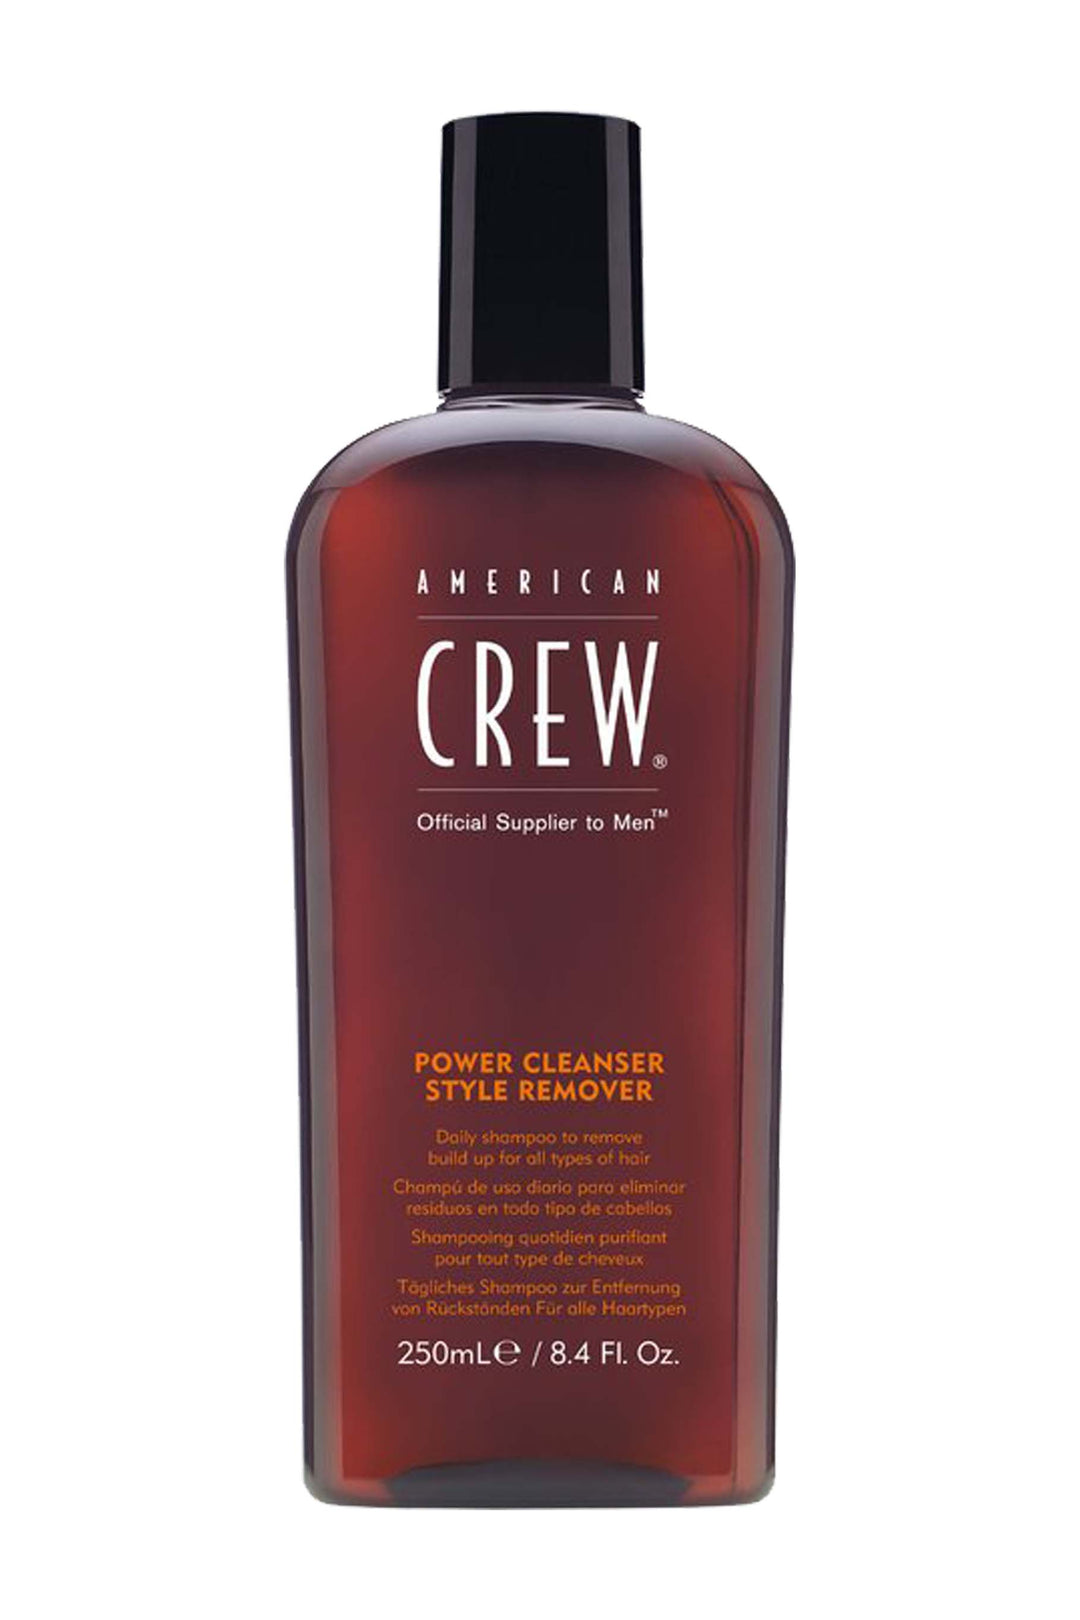 american-crew-power-cleanser-style-remover-250ml